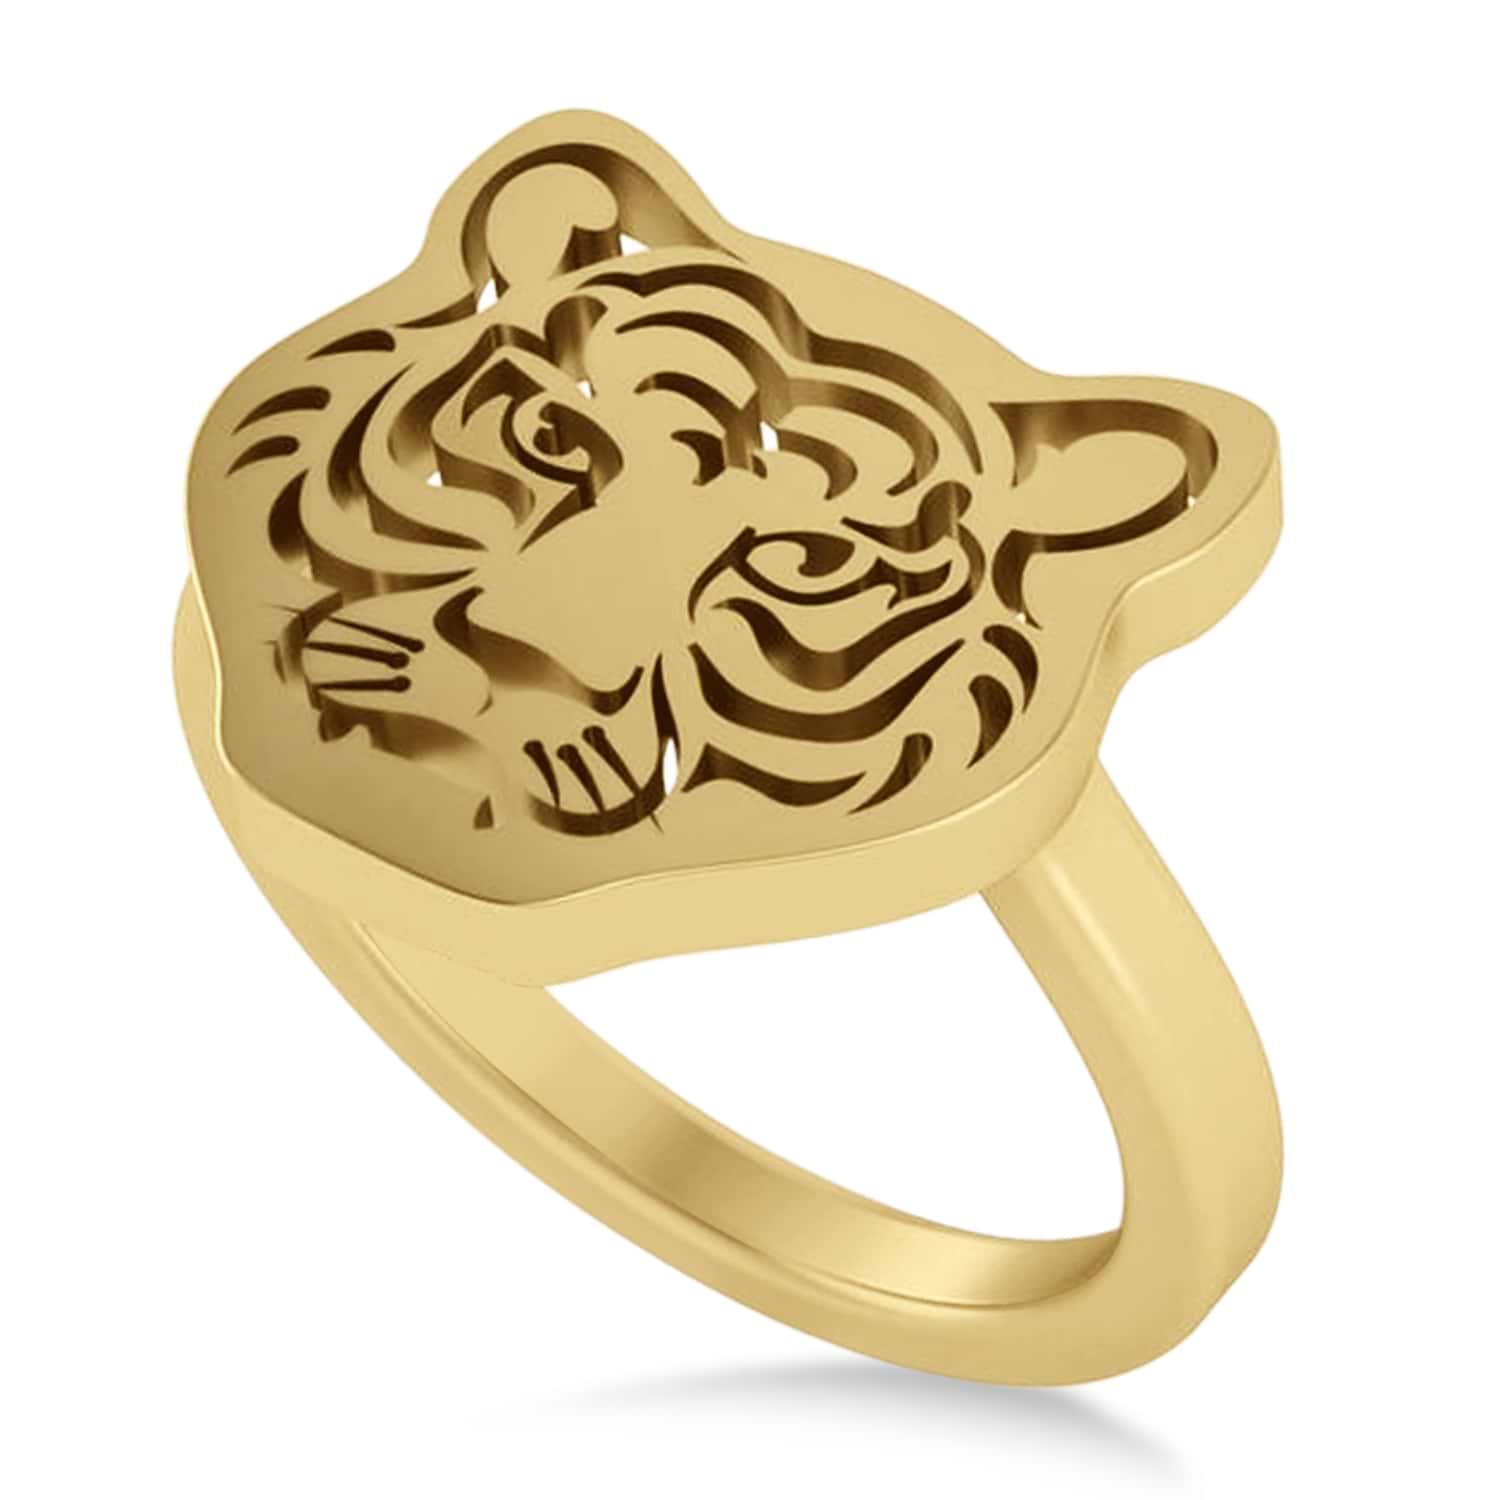 Buy Tiger Ring Tiger Head Ring Gold IP Plated Stainless Steel Gothic Tiger  Head Ring Mens Tiger Head Ring Biker Ring for Men and Women Online in India  - Etsy